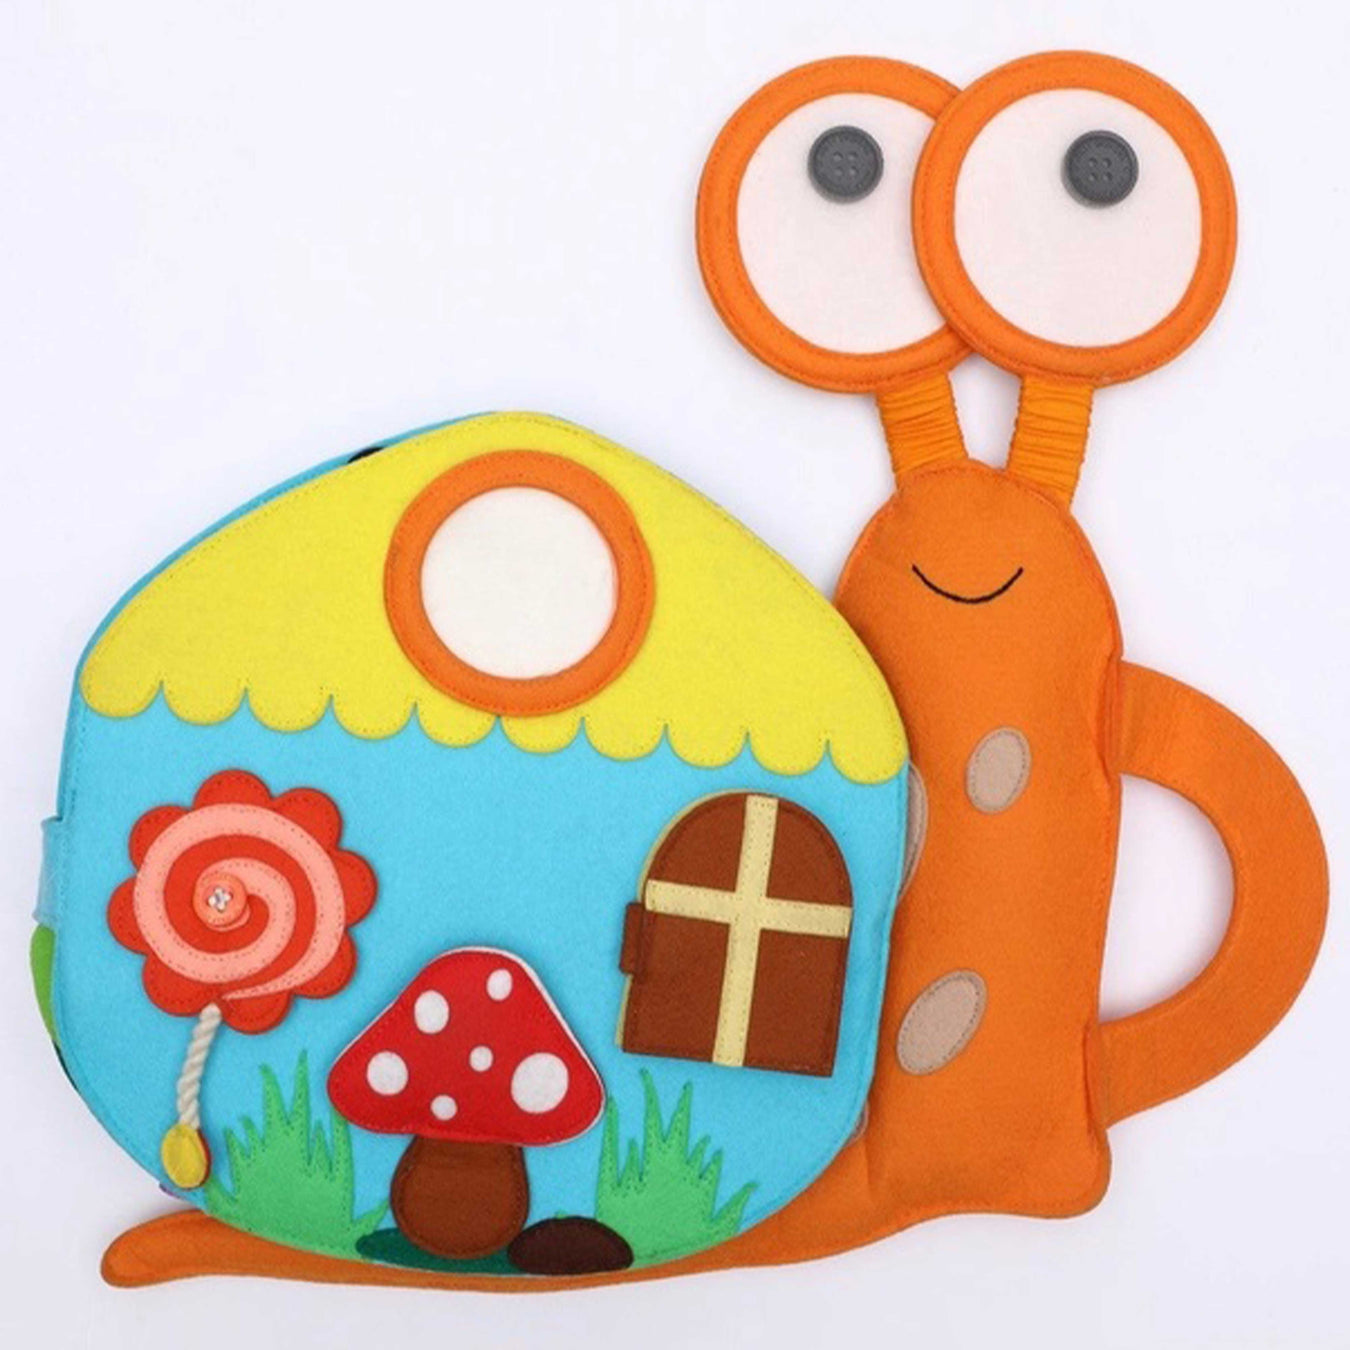 Travel Buddy Snail soft toy orange snail with blue and yellow shell which has a rad and white mushroom and mirror on it